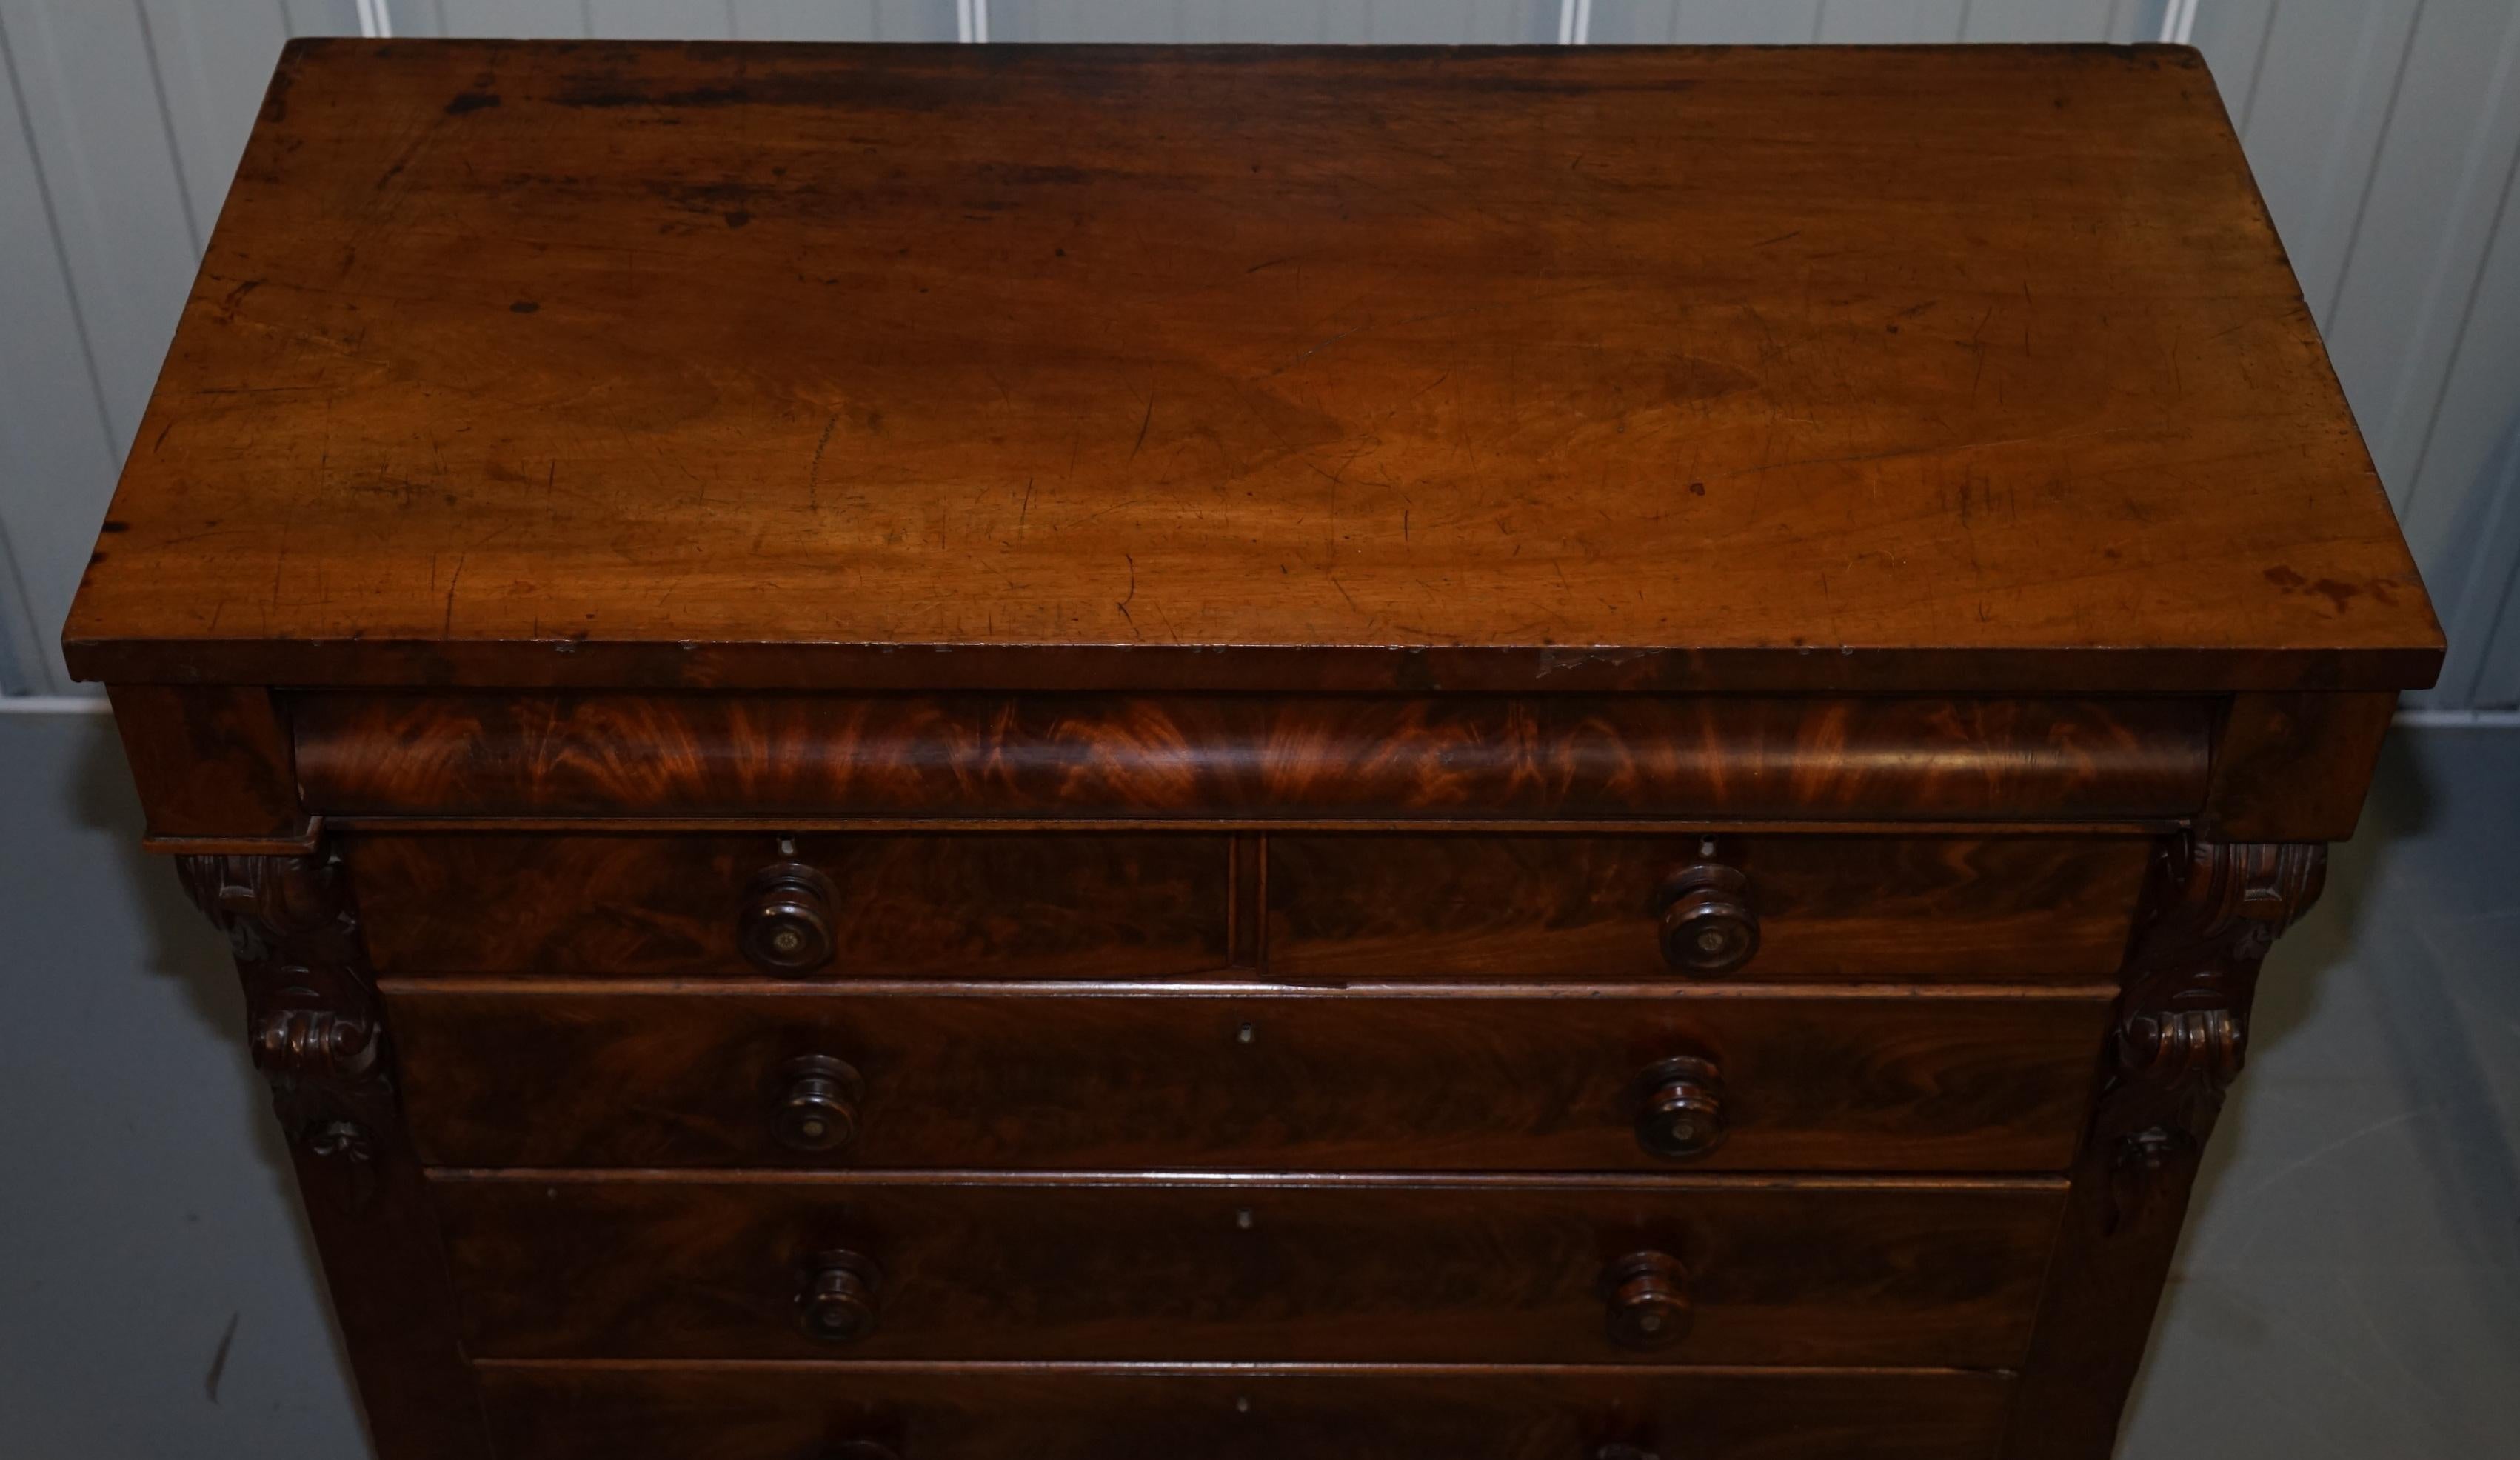 Hand-Crafted Victorian Flamed Mahogany Chest of Drawers Large Substantial Storage Options